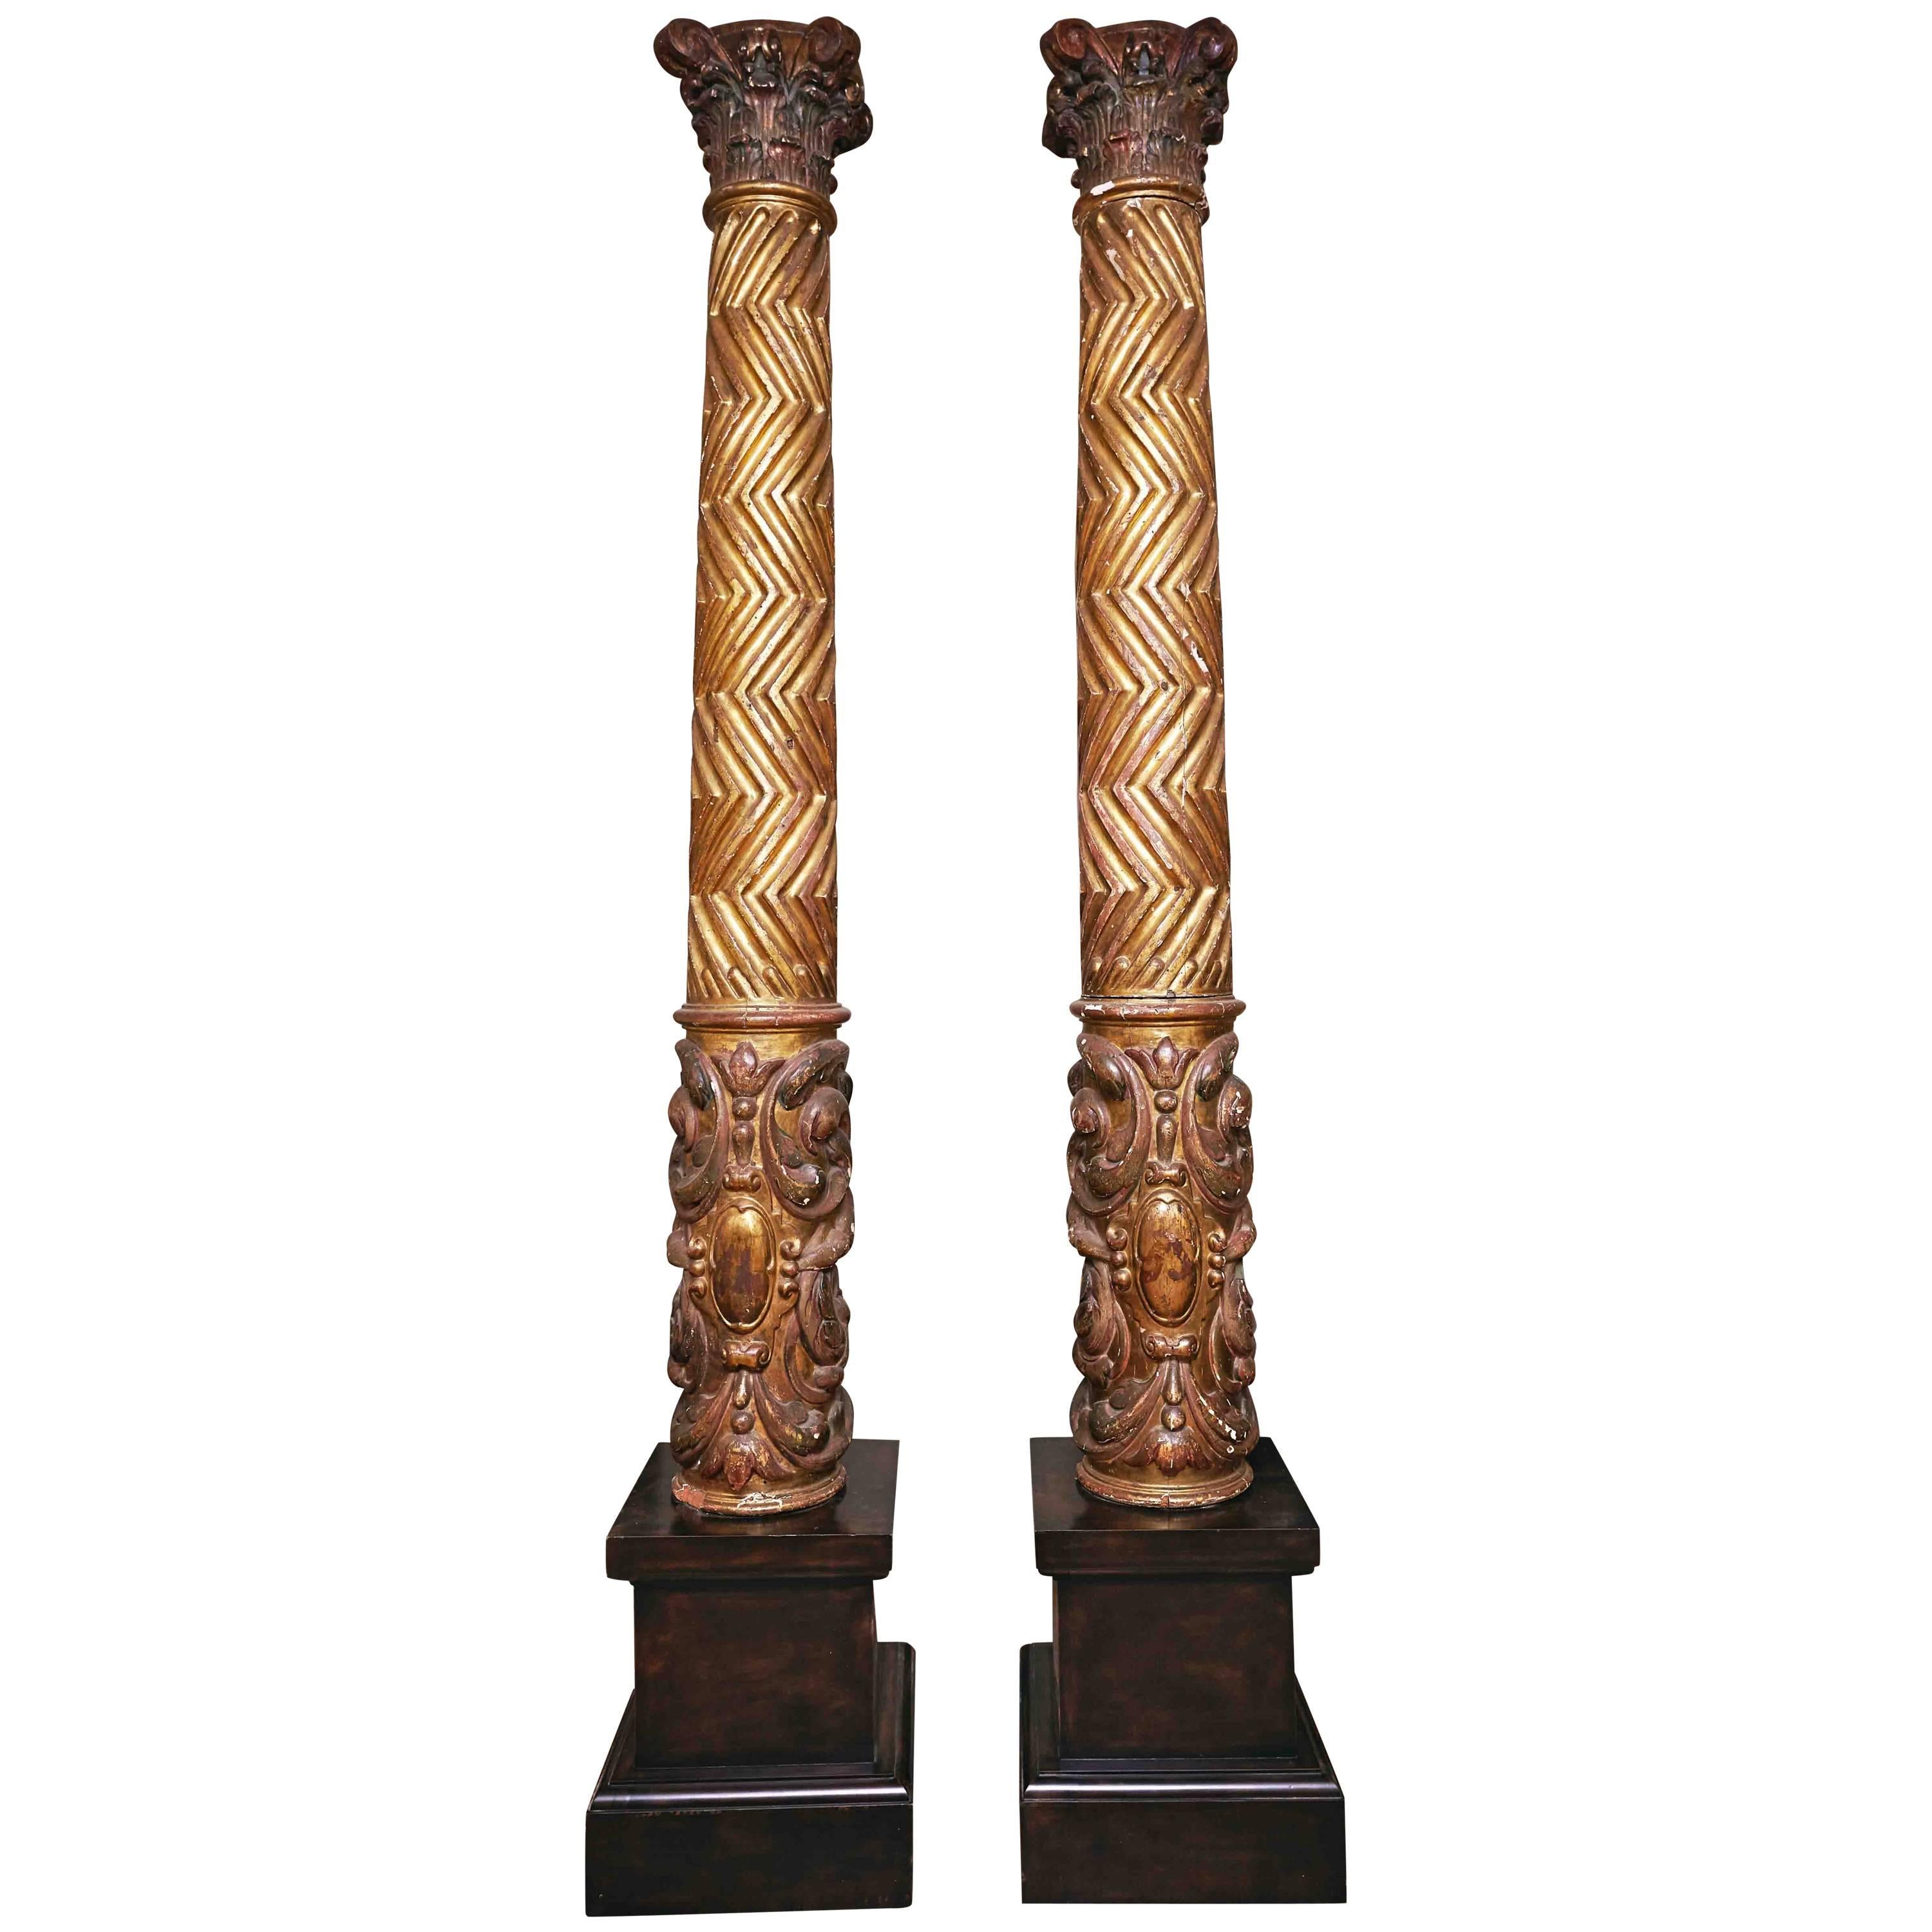 Pair of 17th Century Spanish Carved Gilt and Polychrome Wood Columns